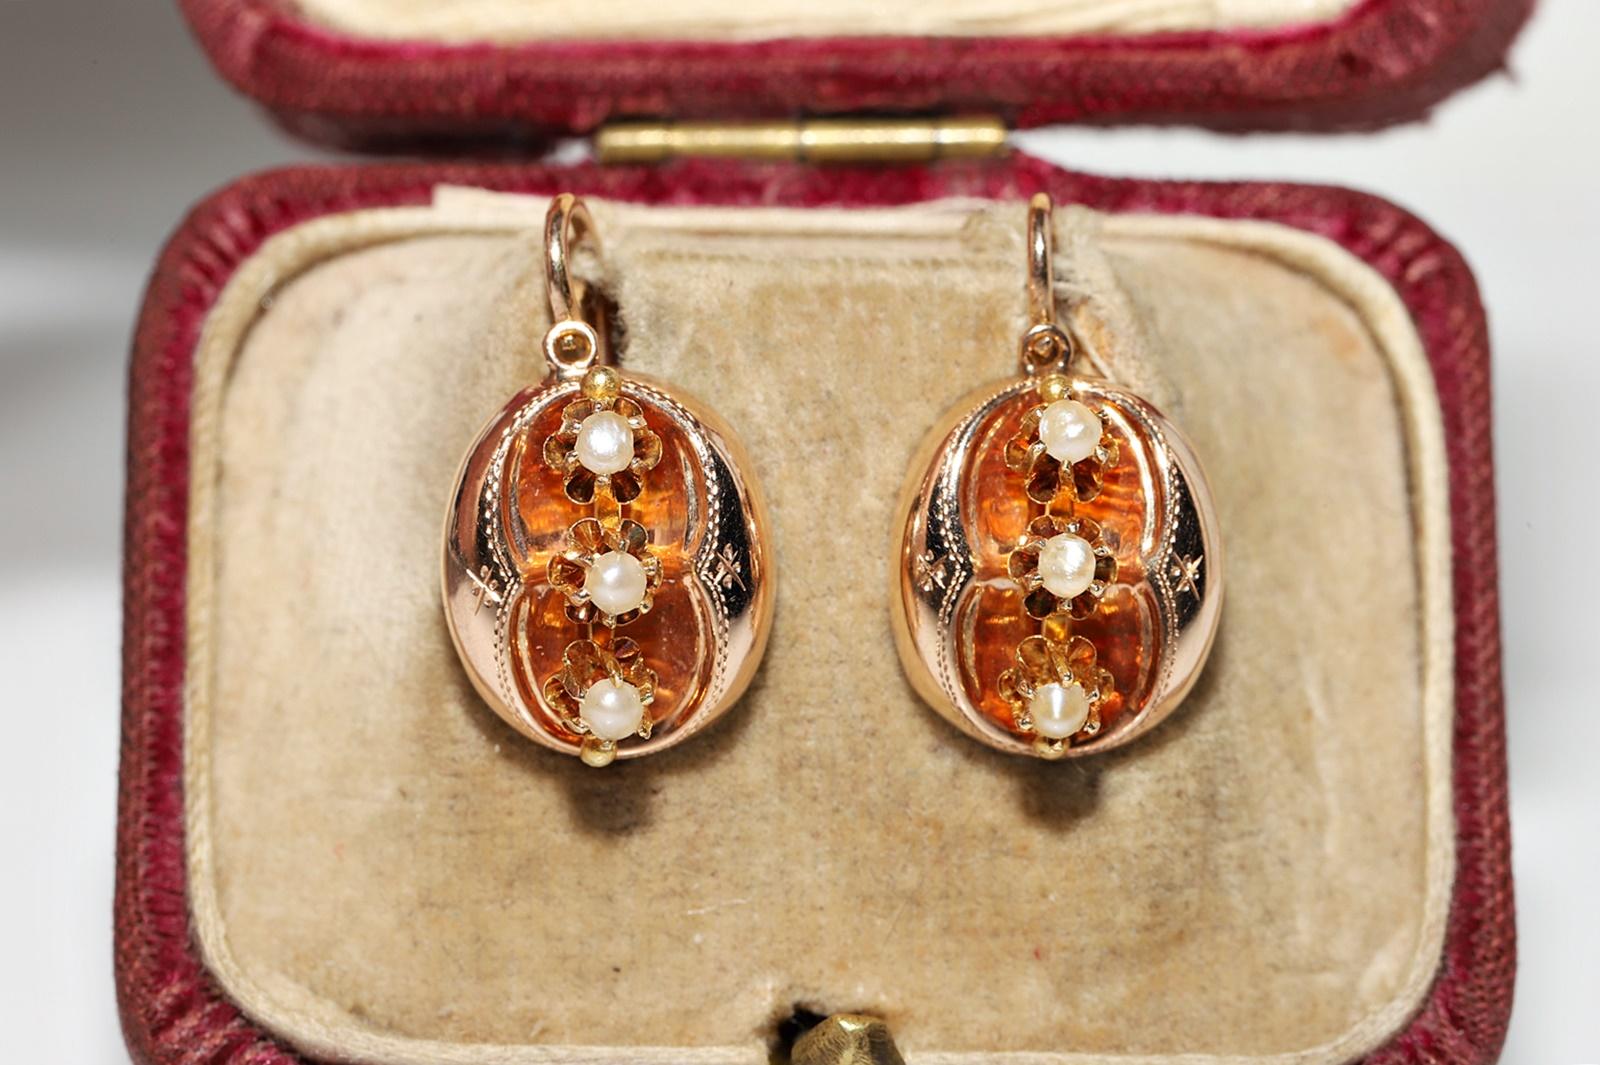 Retro Vintage Circa 1950s 14k Rose Gold Pearl Decorated Earring For Sale